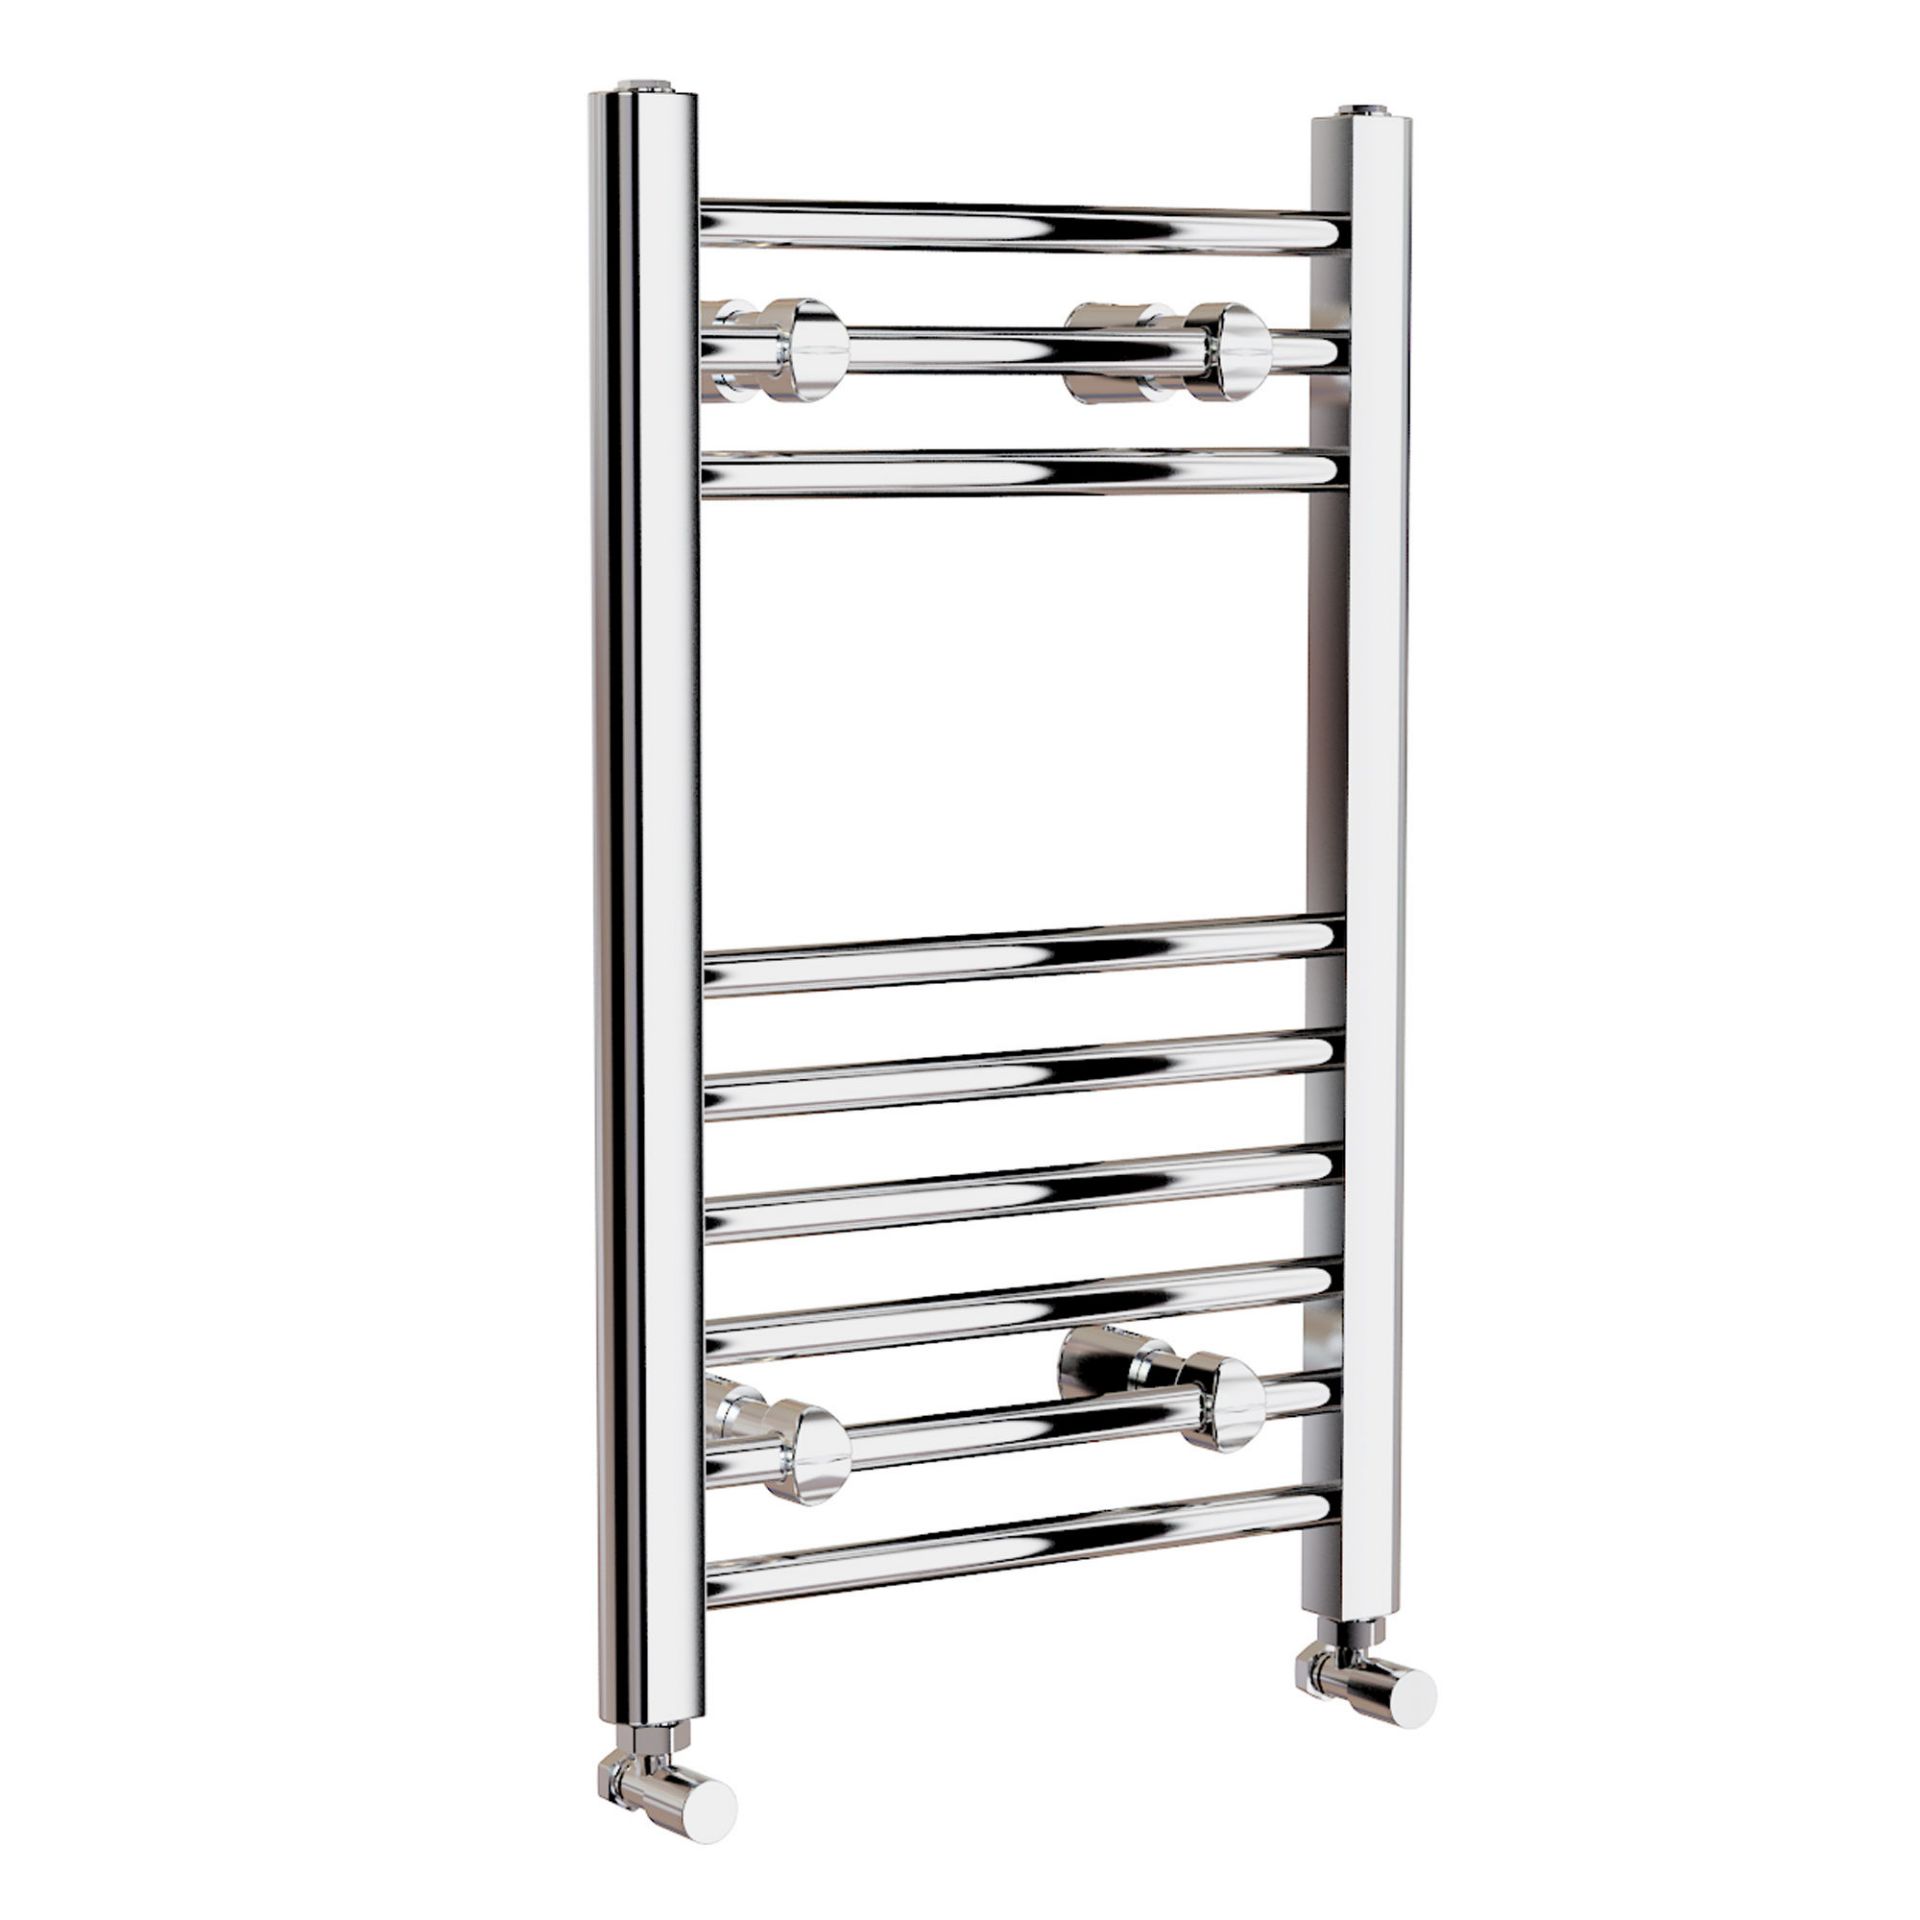 (HP69) 650x400mm Straight Heated Towel Radiator. Low carbon steel chrome plated radiator. This